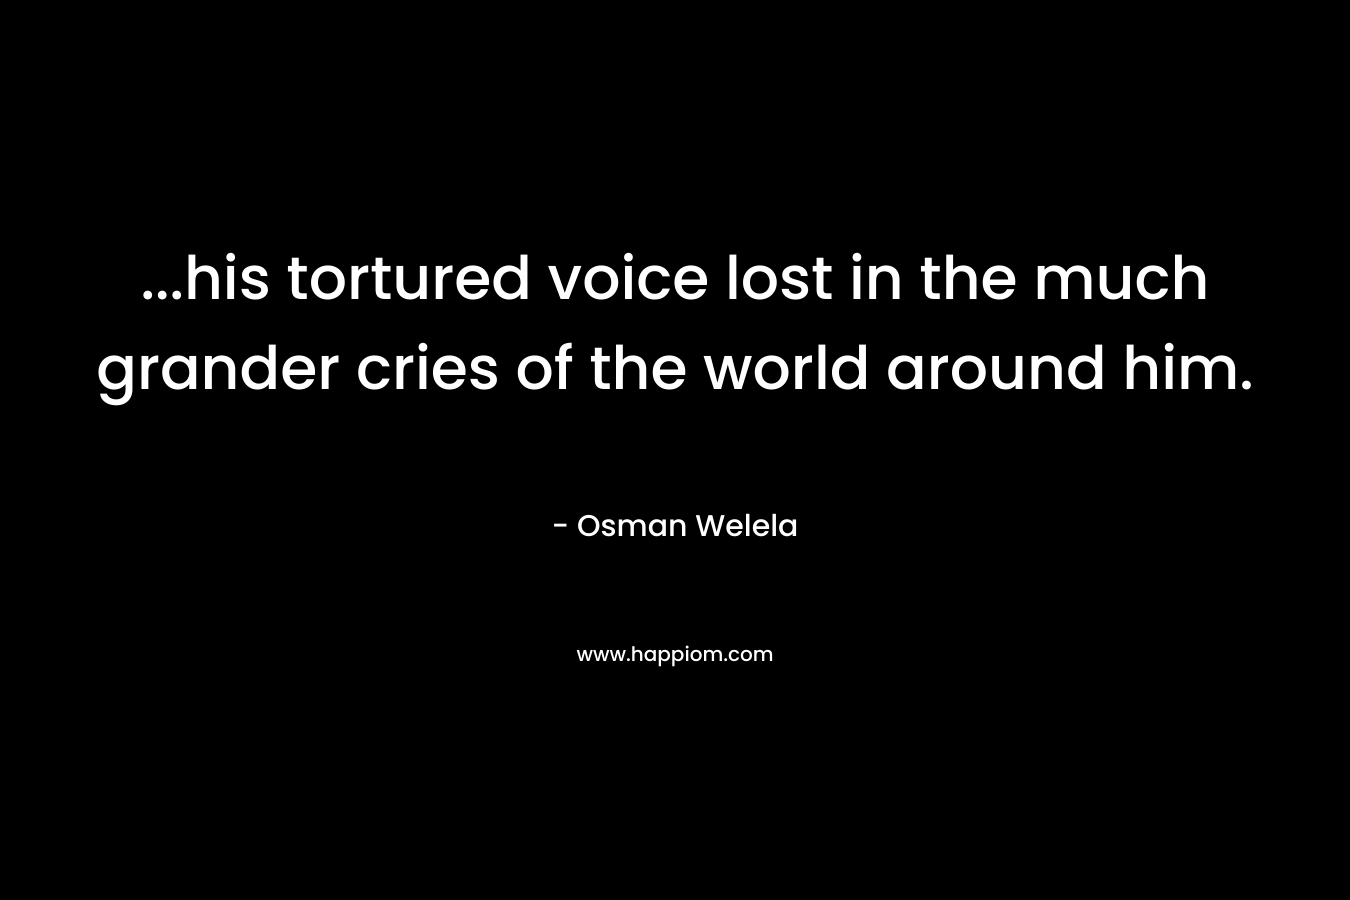 ...his tortured voice lost in the much grander cries of the world around him.